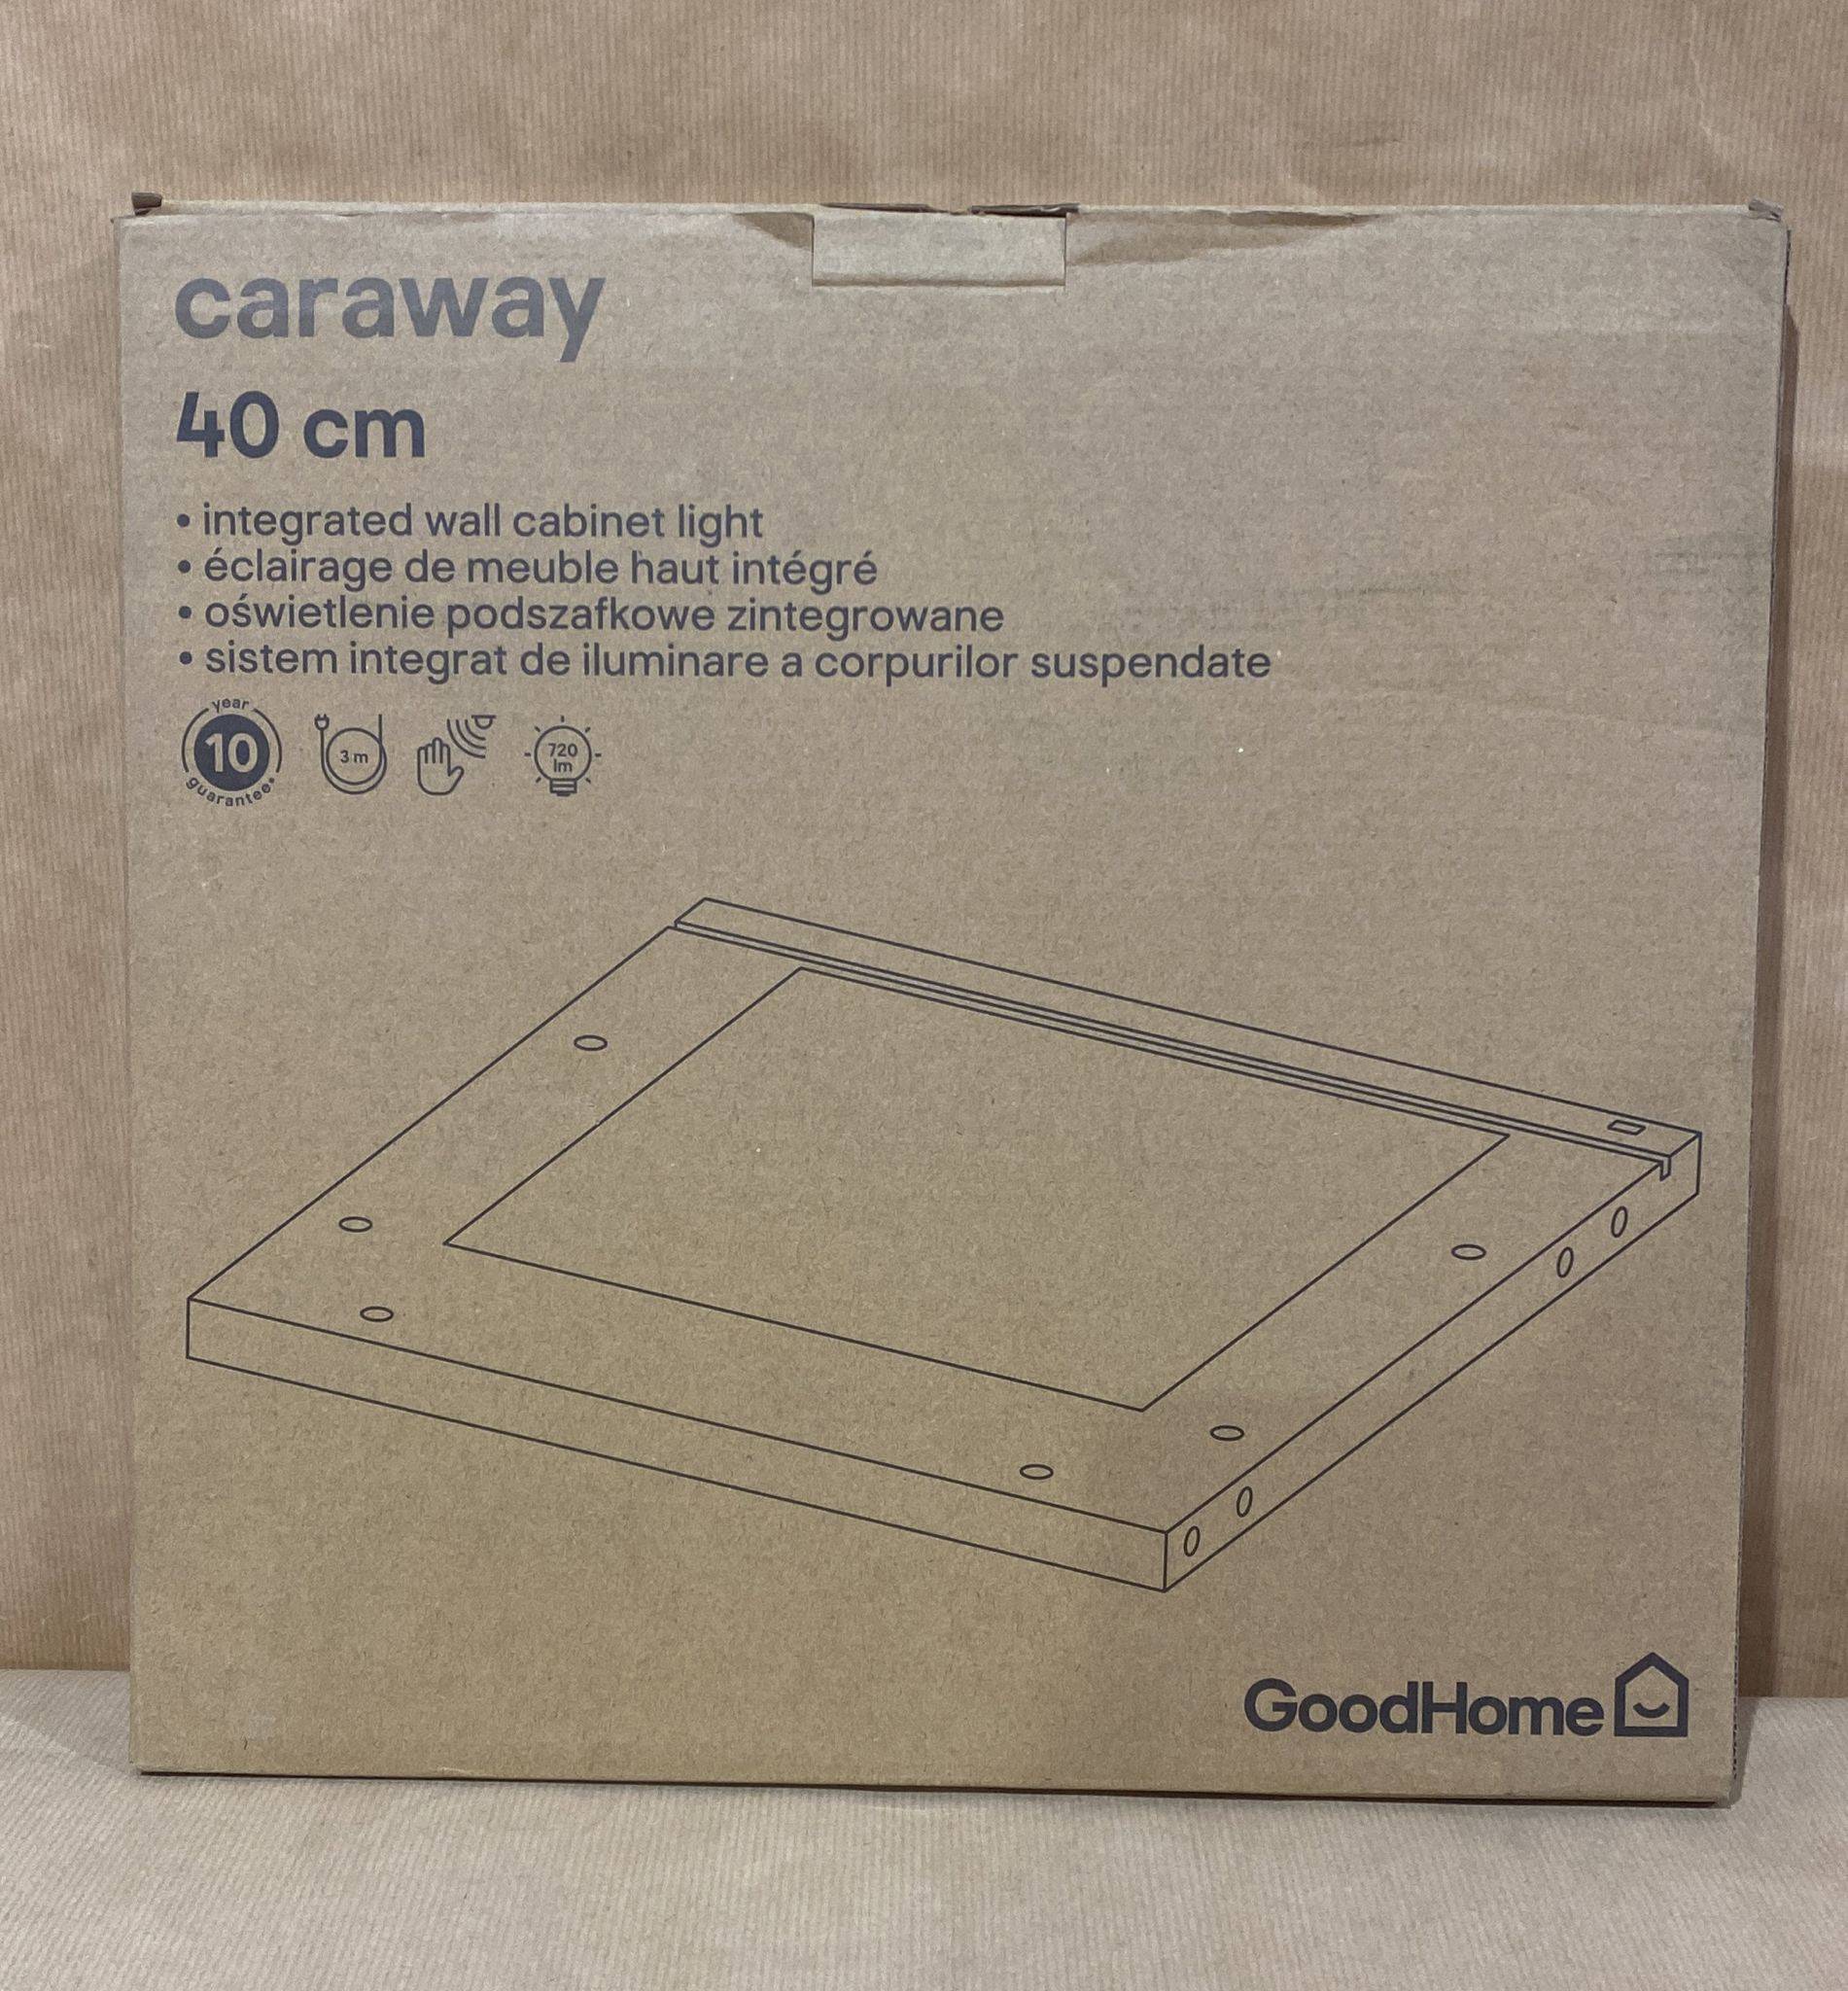 GoodHome Caraway Mains-powered LED Cool white & warm Cabinet light 364mm Without Power lead - 0788